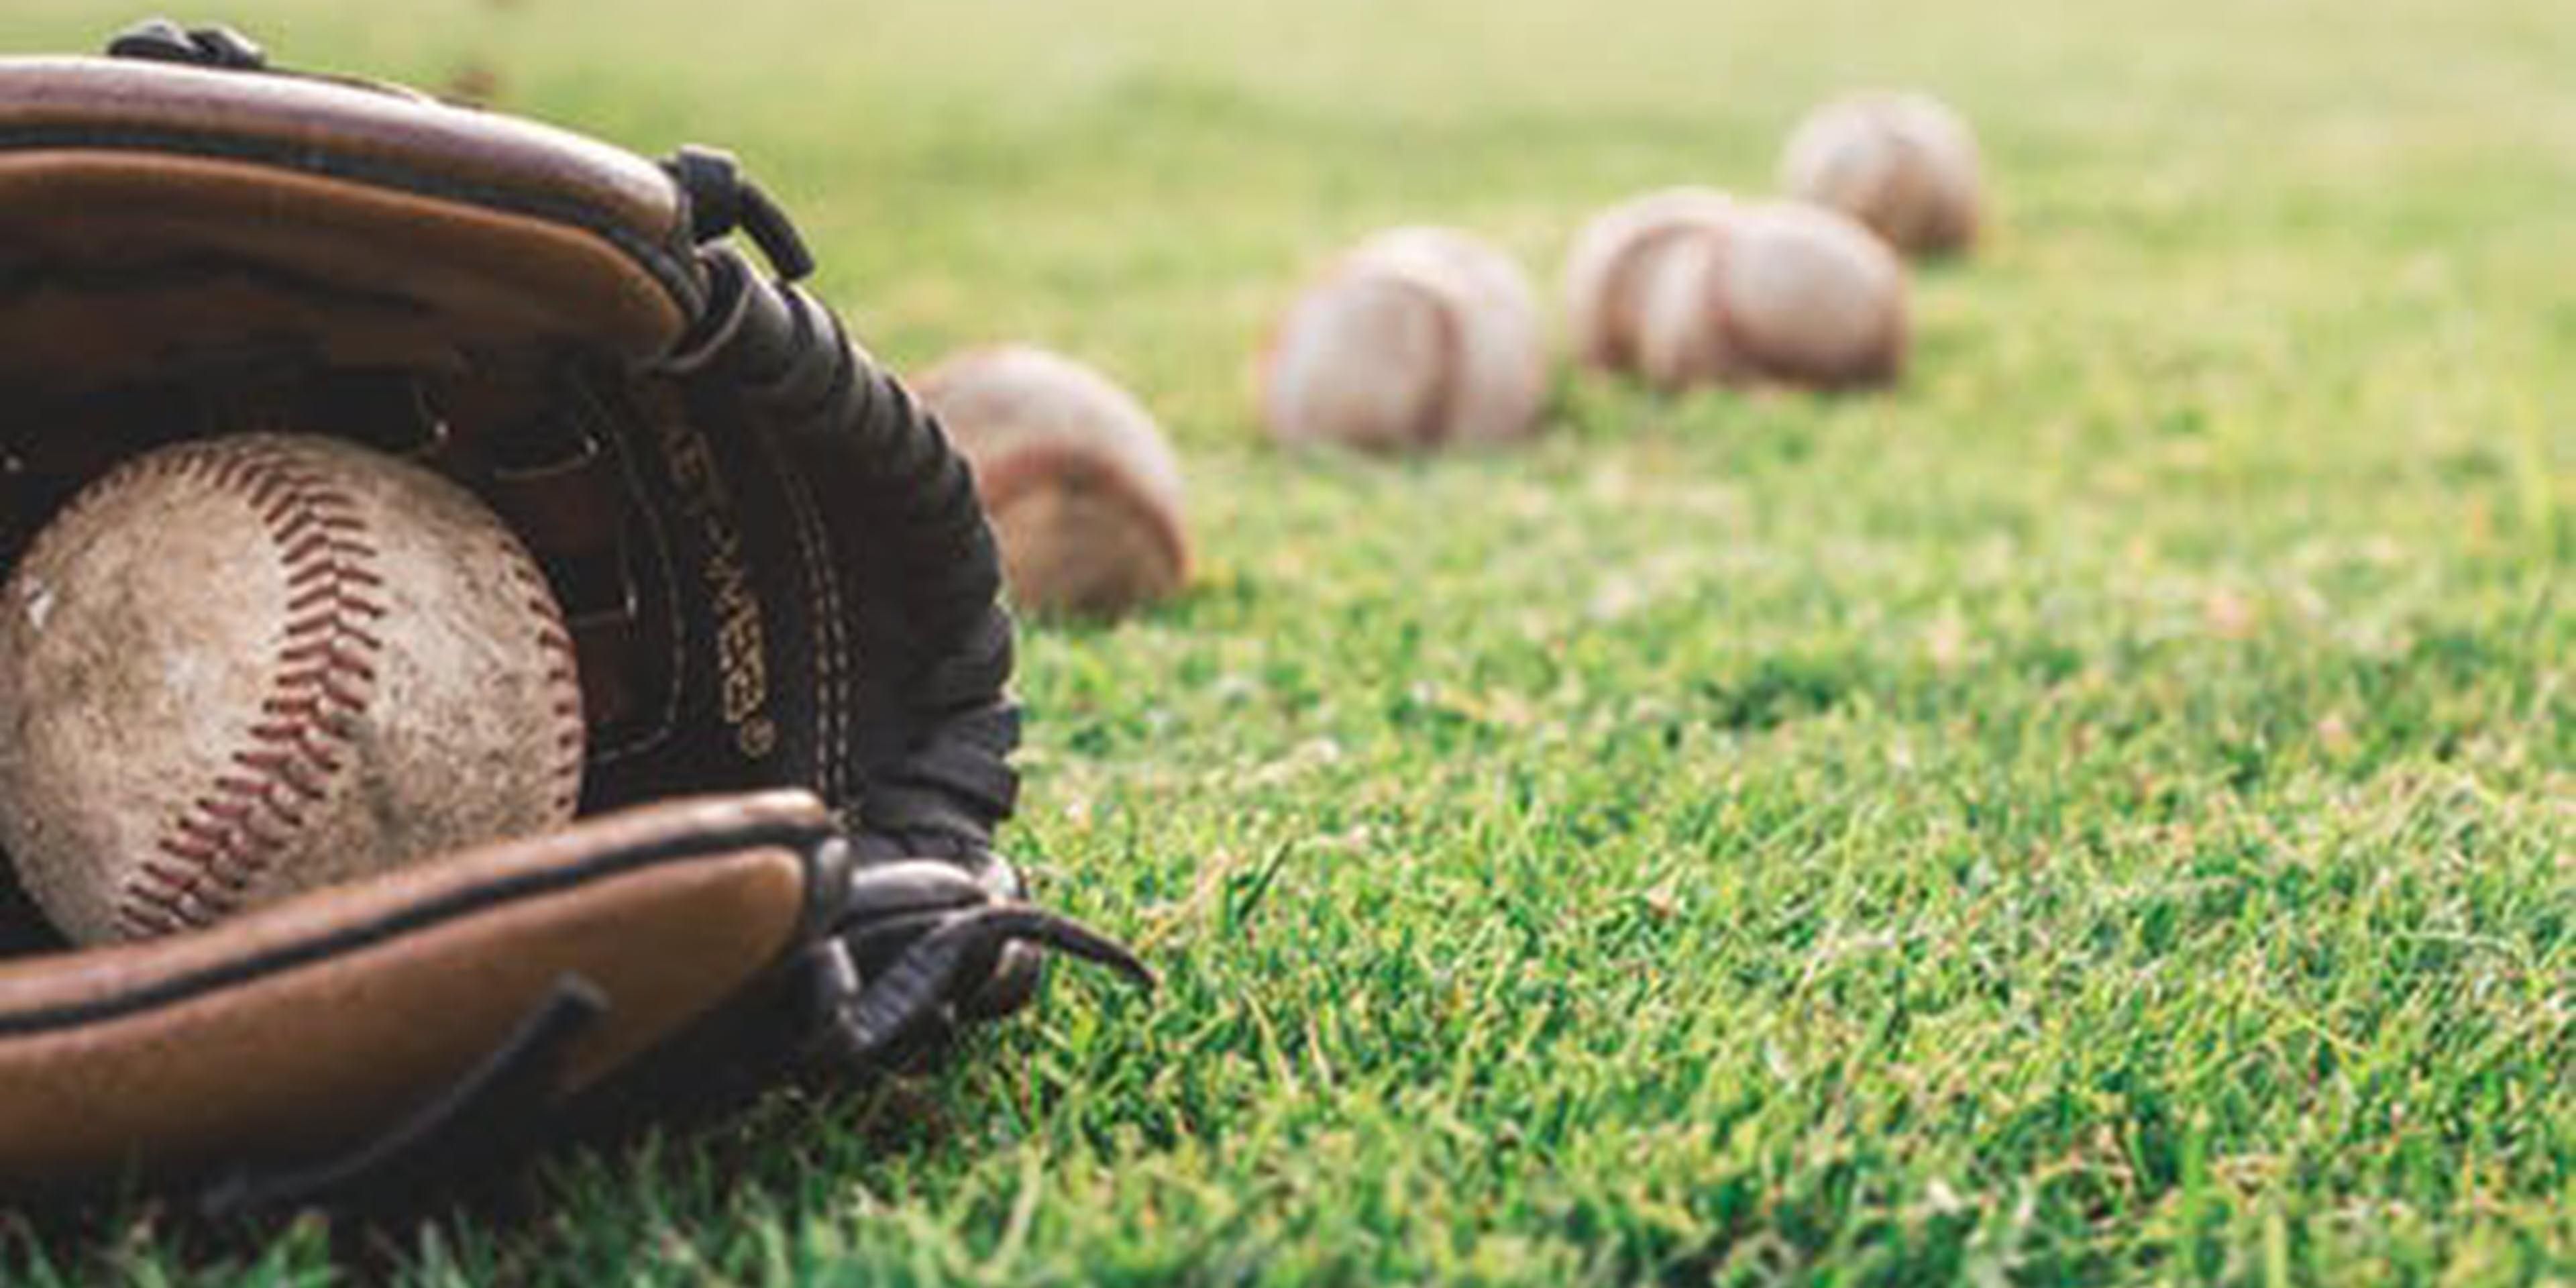 When coming to the area for a baseball or softball tournament, our hotel is located within 10 miles of the Frito Lay Pepsi Field and Centerfield Baseball Parks.  We offer group rates for your team and a hot breakfast each day of your stay. Reach out to us for additional information to make your visit to Plano a, Home Run.